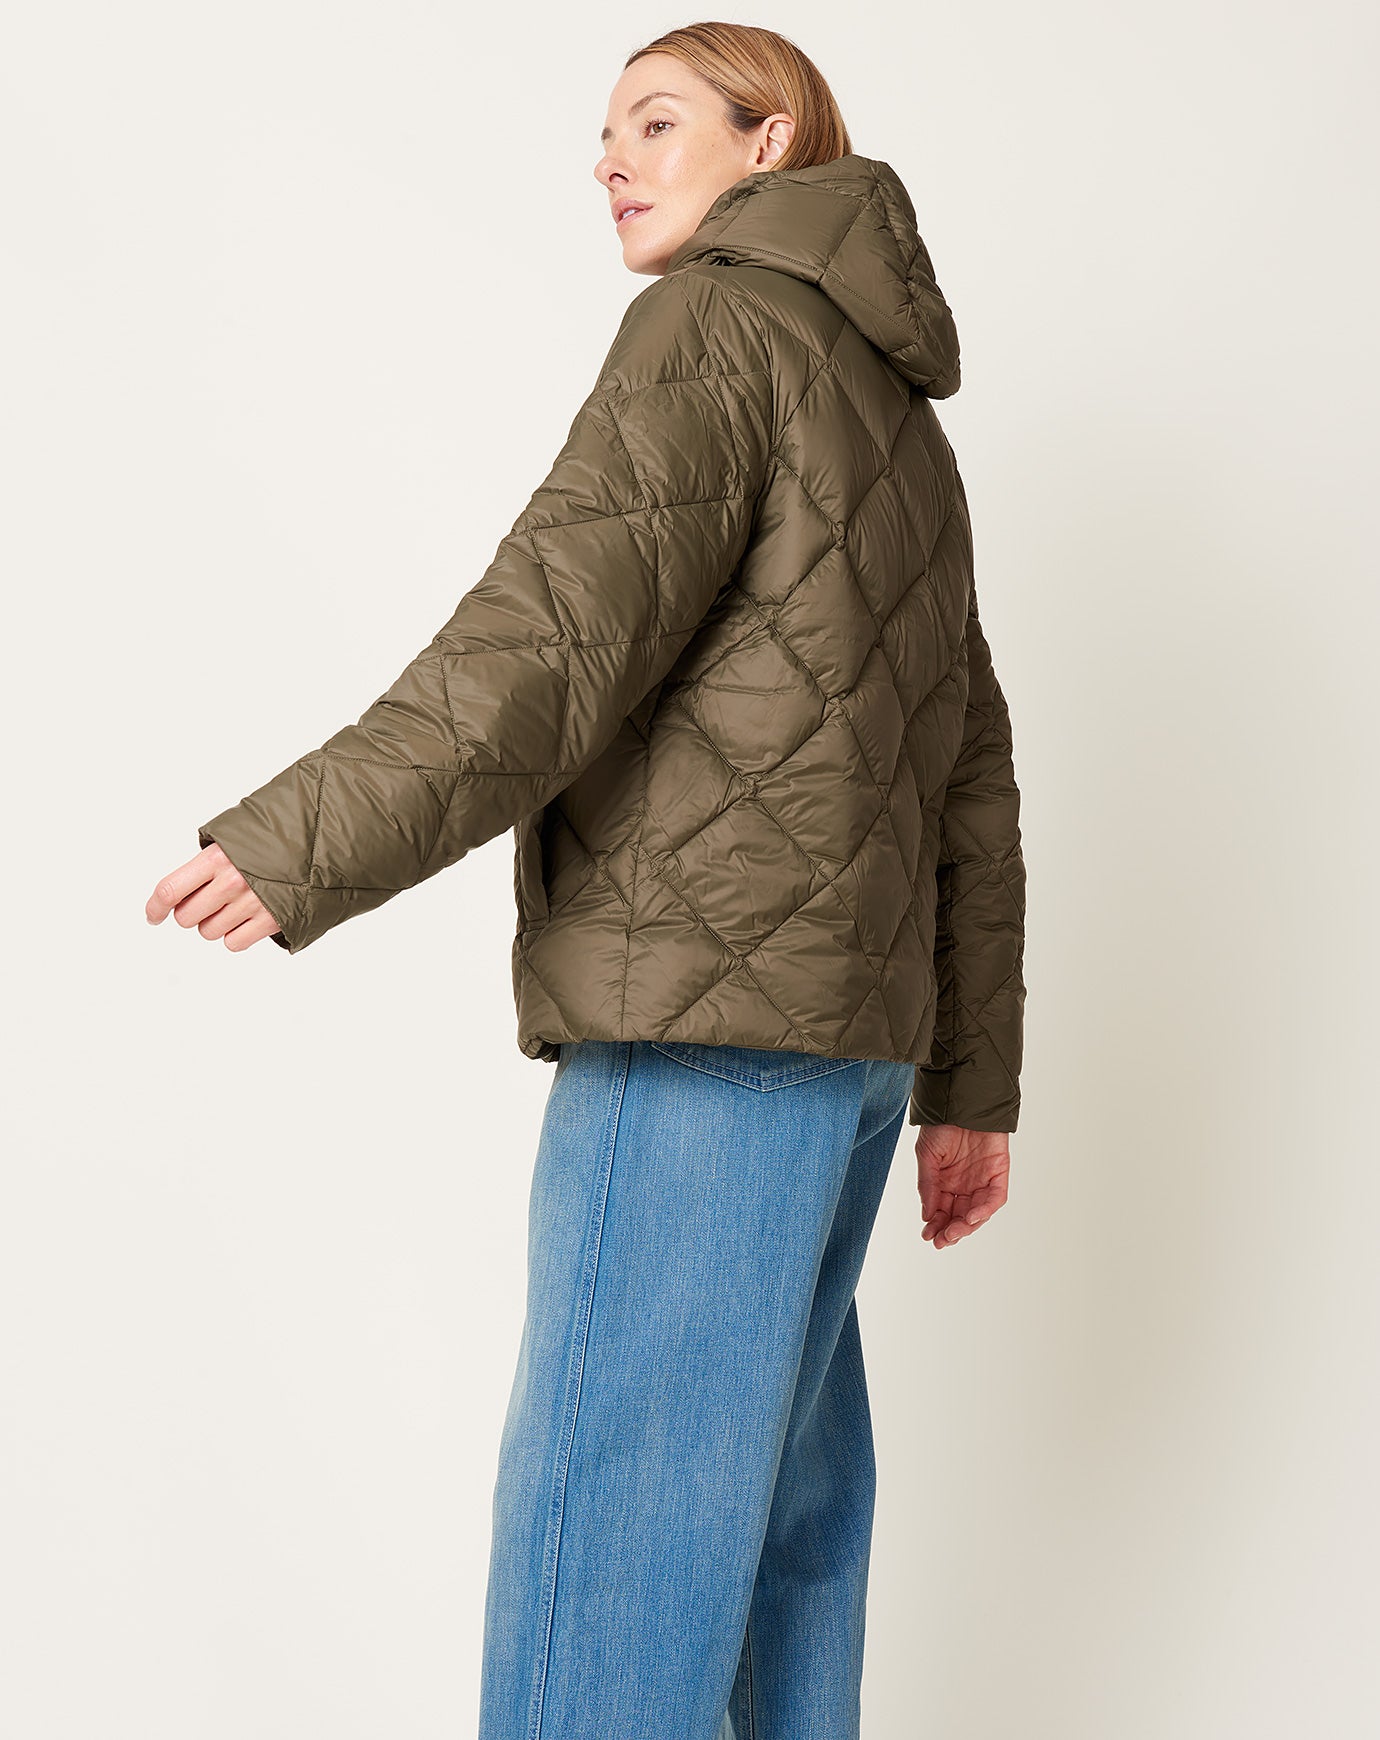 Taion Hood Down Jacket in Olive